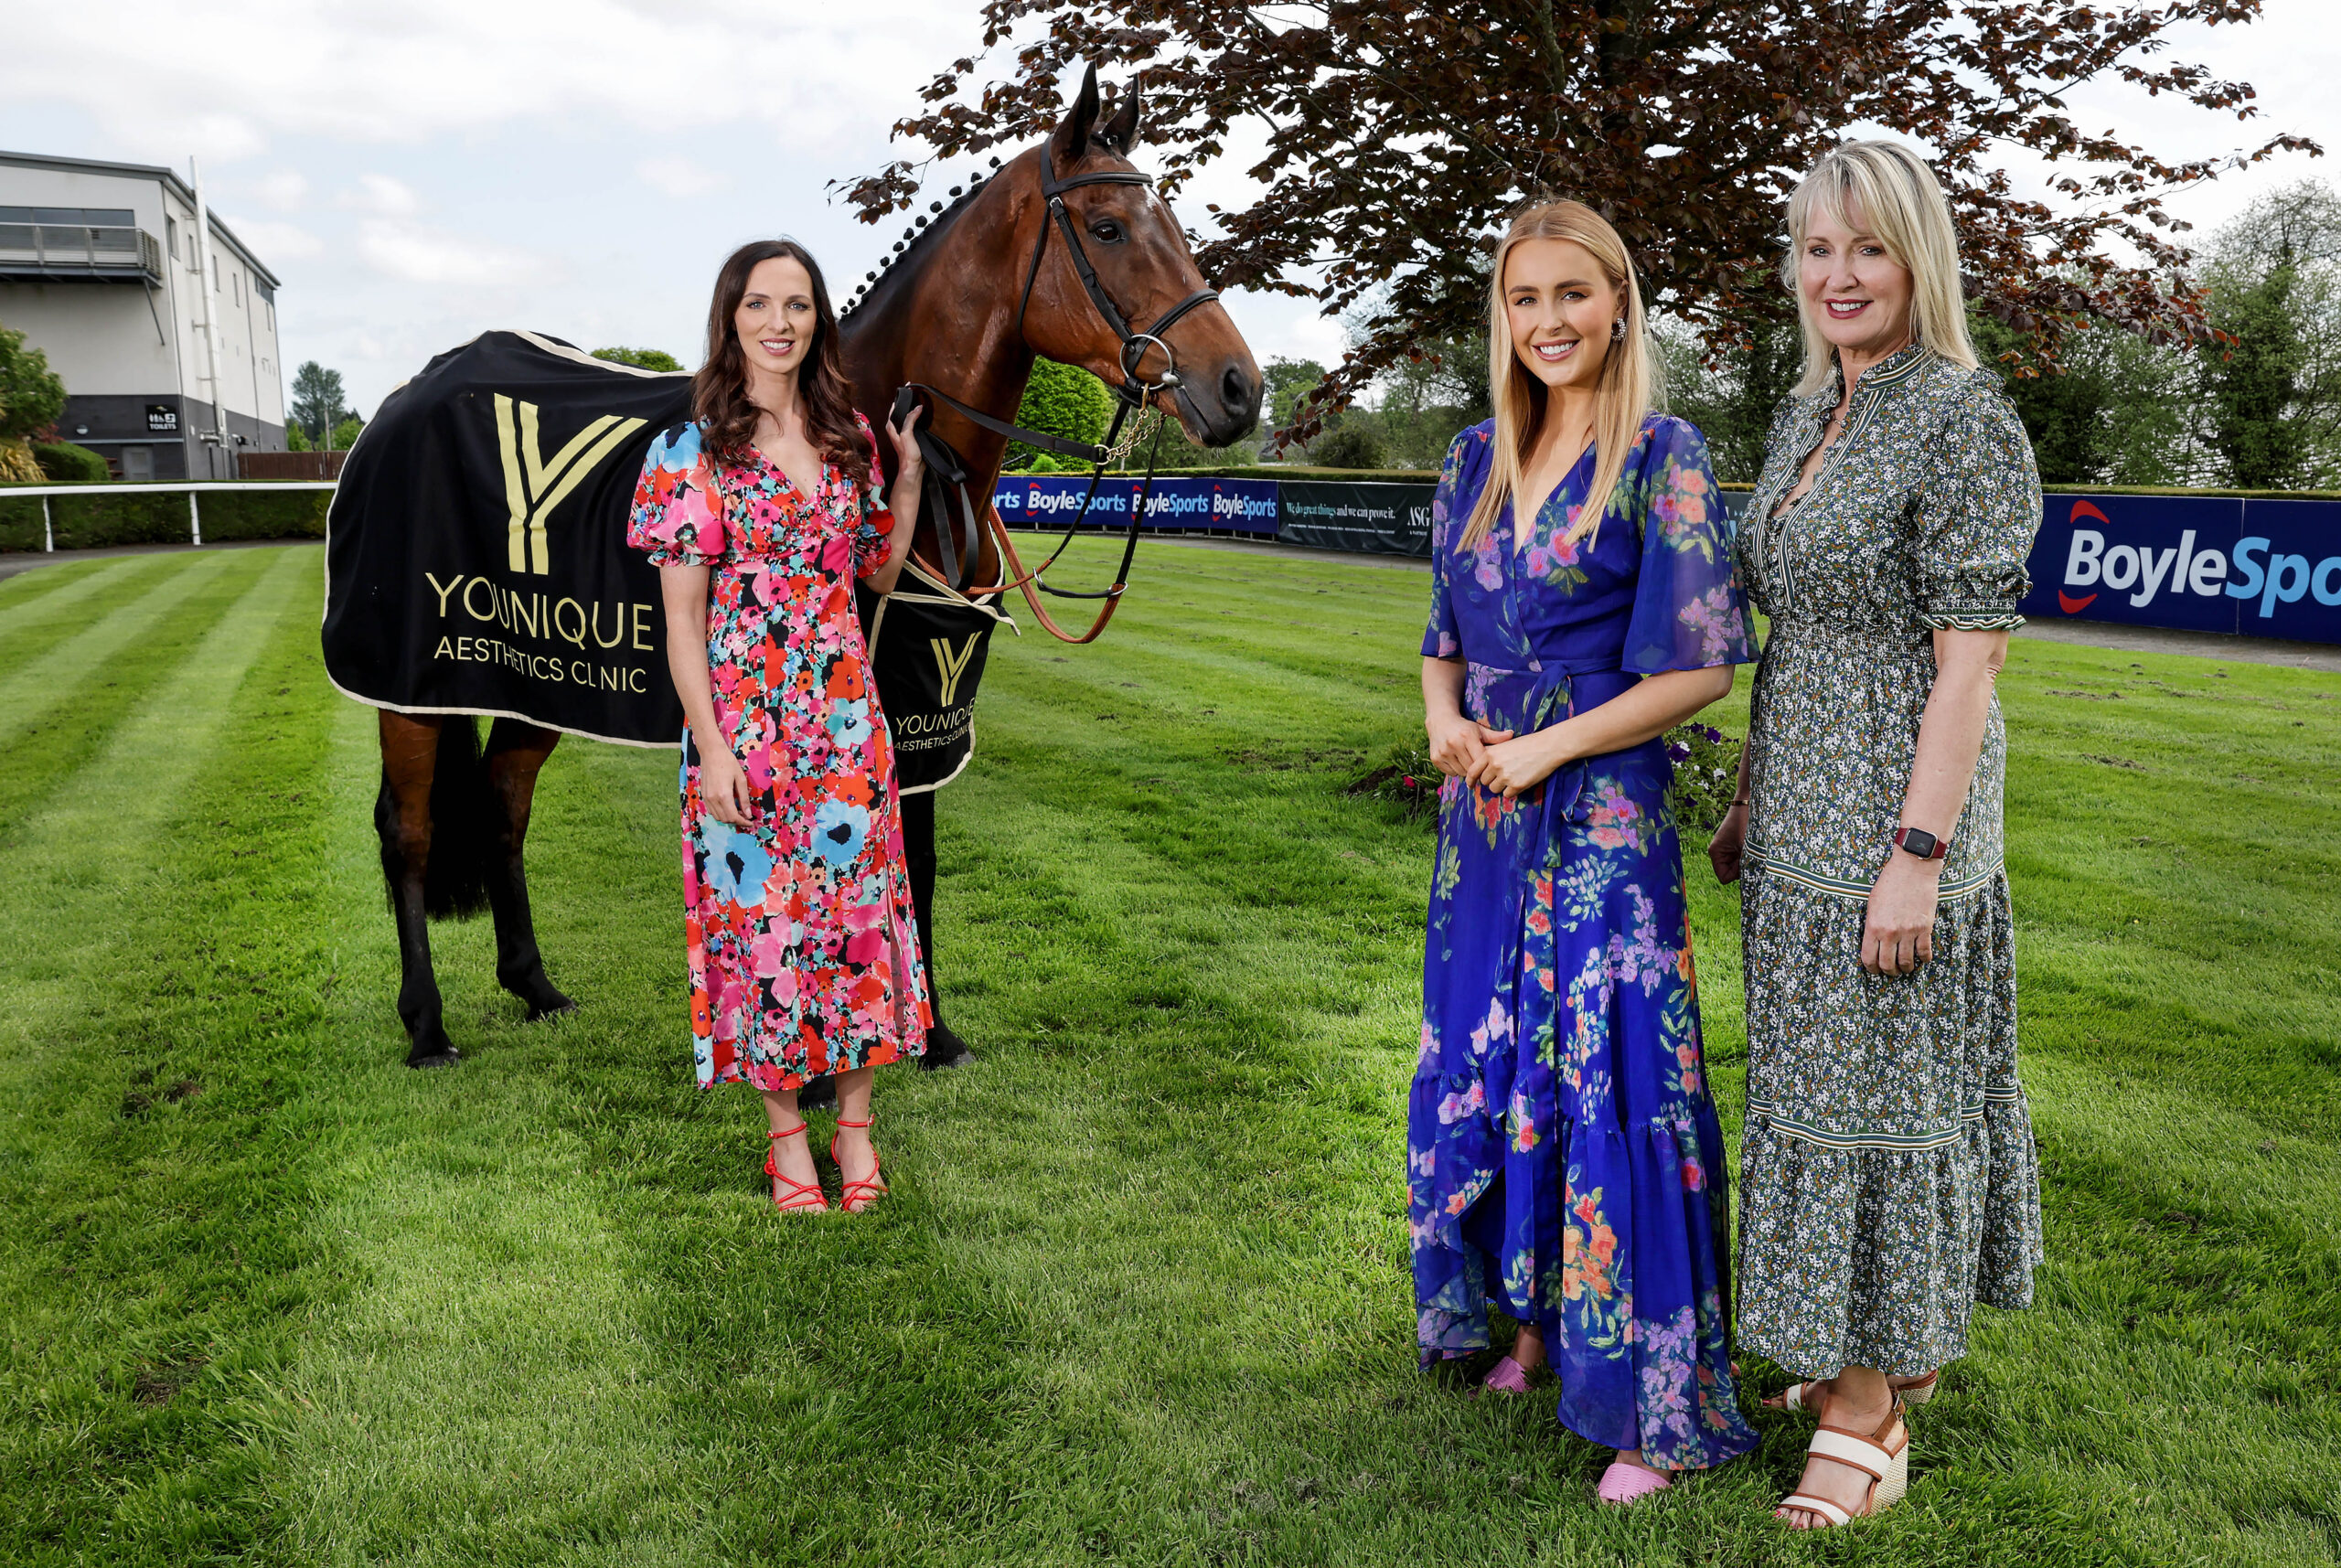 A winning combination as Younique Aesthetics returns to Down Royal as Best Dressed sponsor